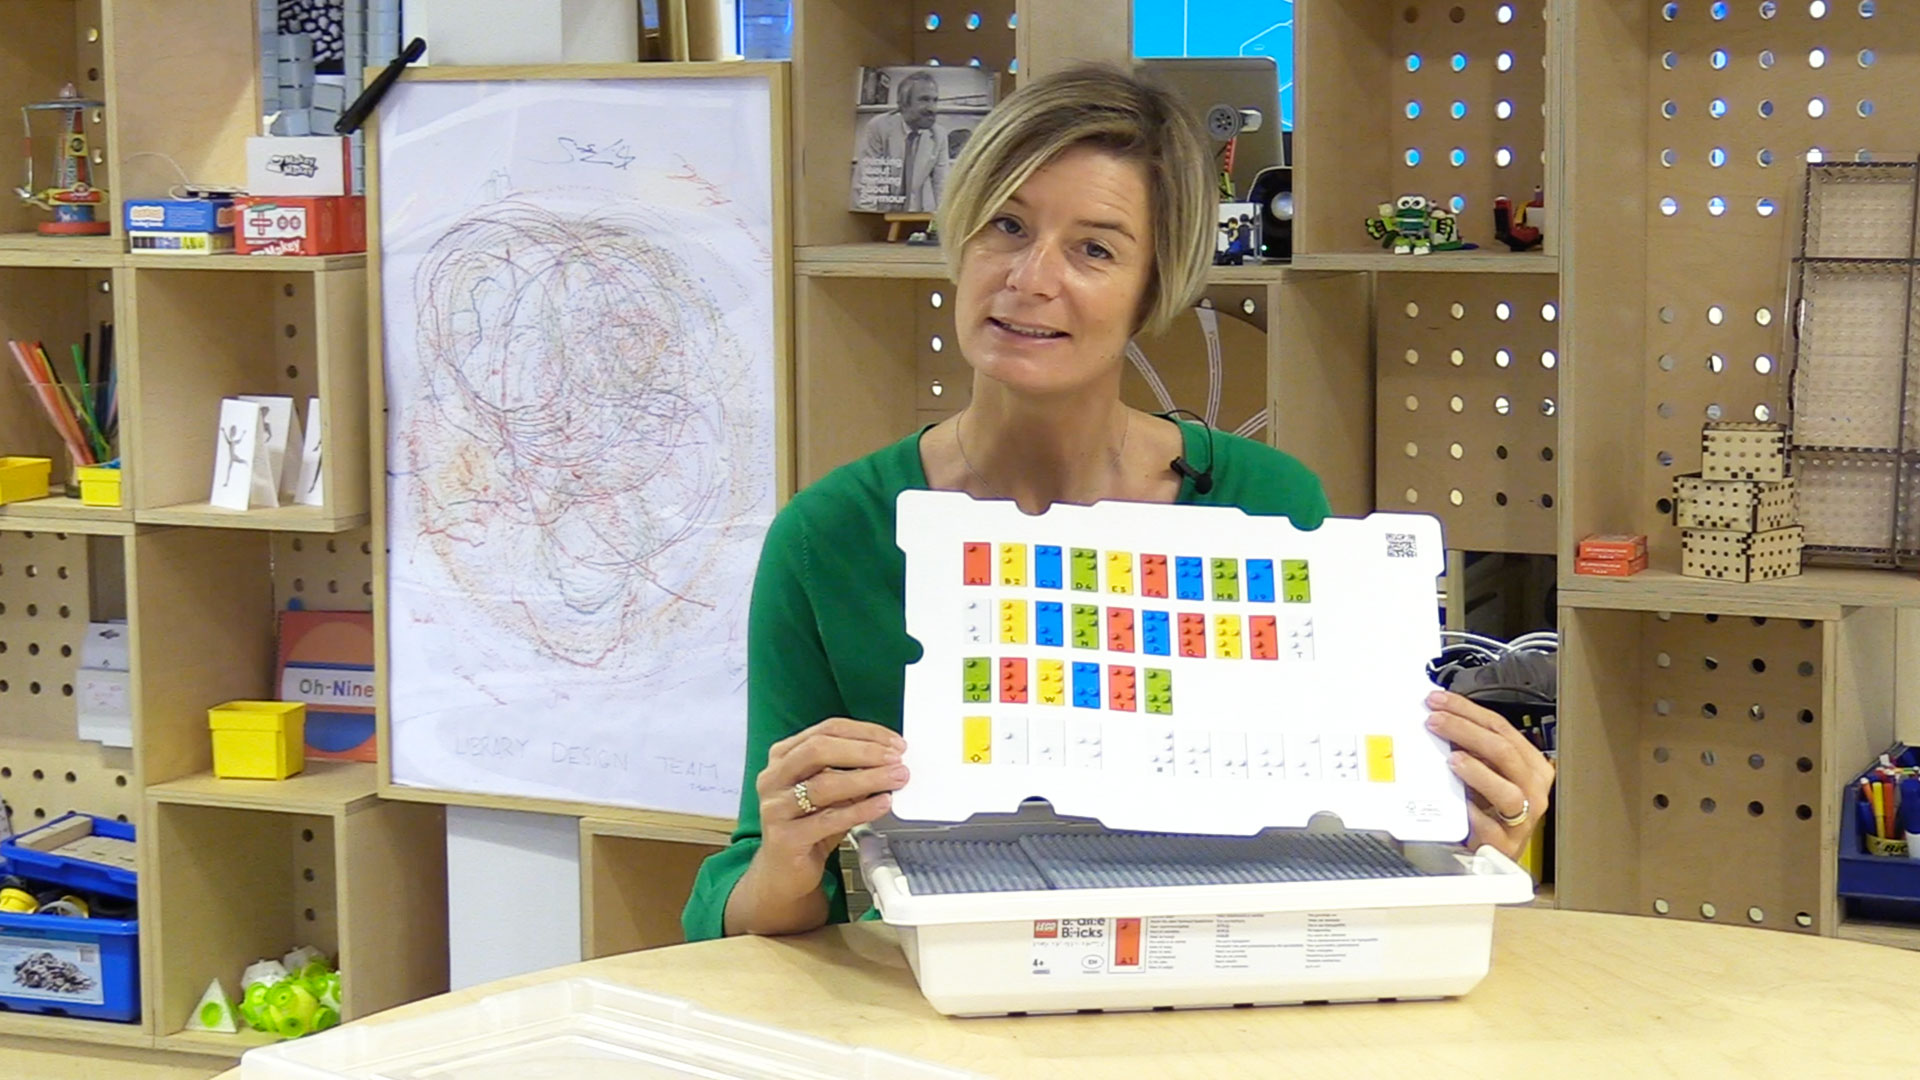 Stine Storm, Project Manager at the LEGO Foundation, presents the LEGO Braille Bricks toolkit.